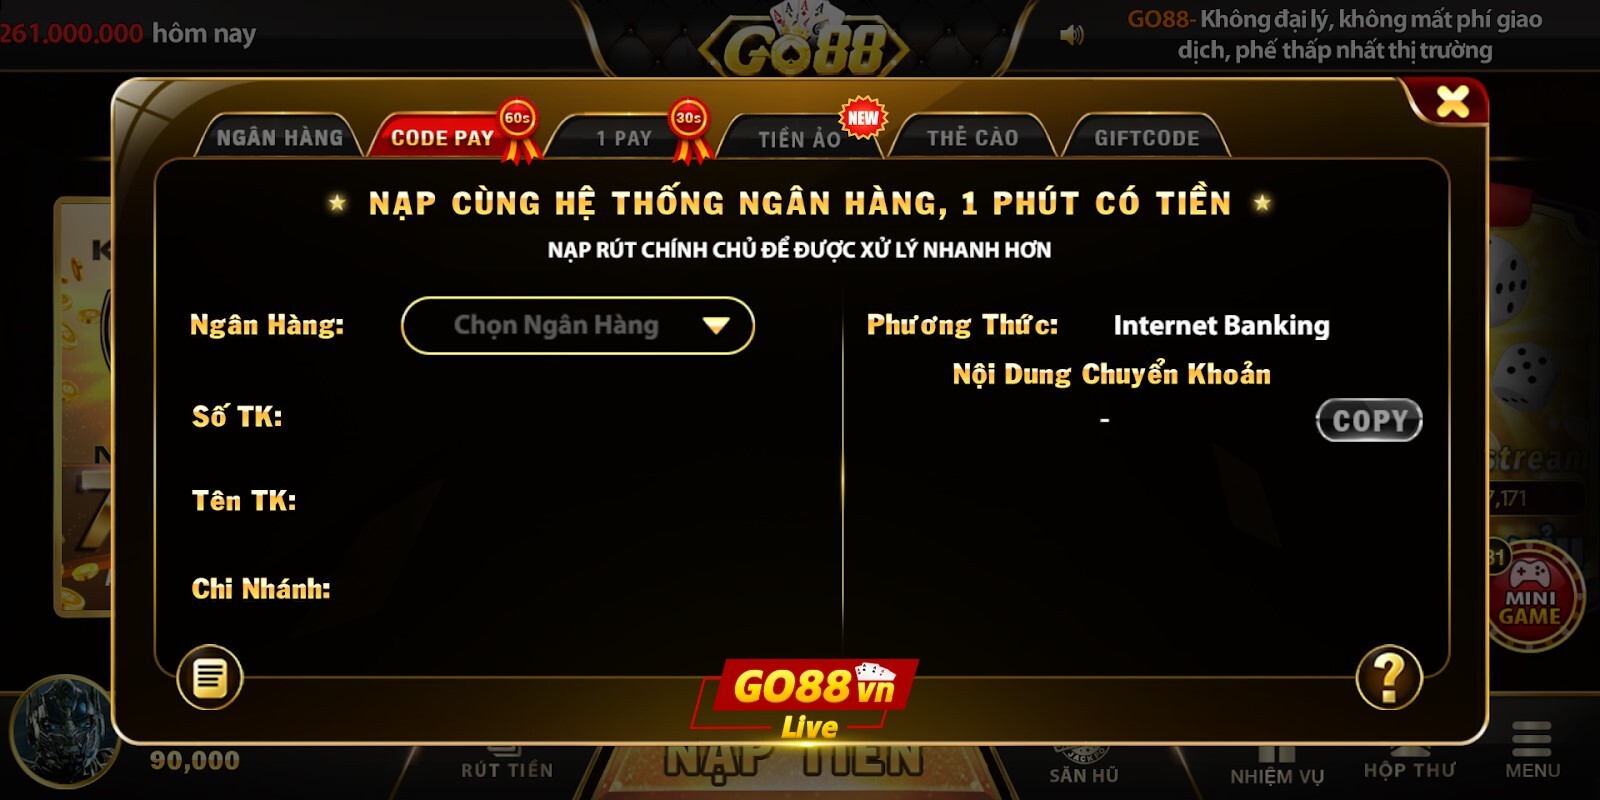 Giao diện nạp tiền tại website Go88 Real